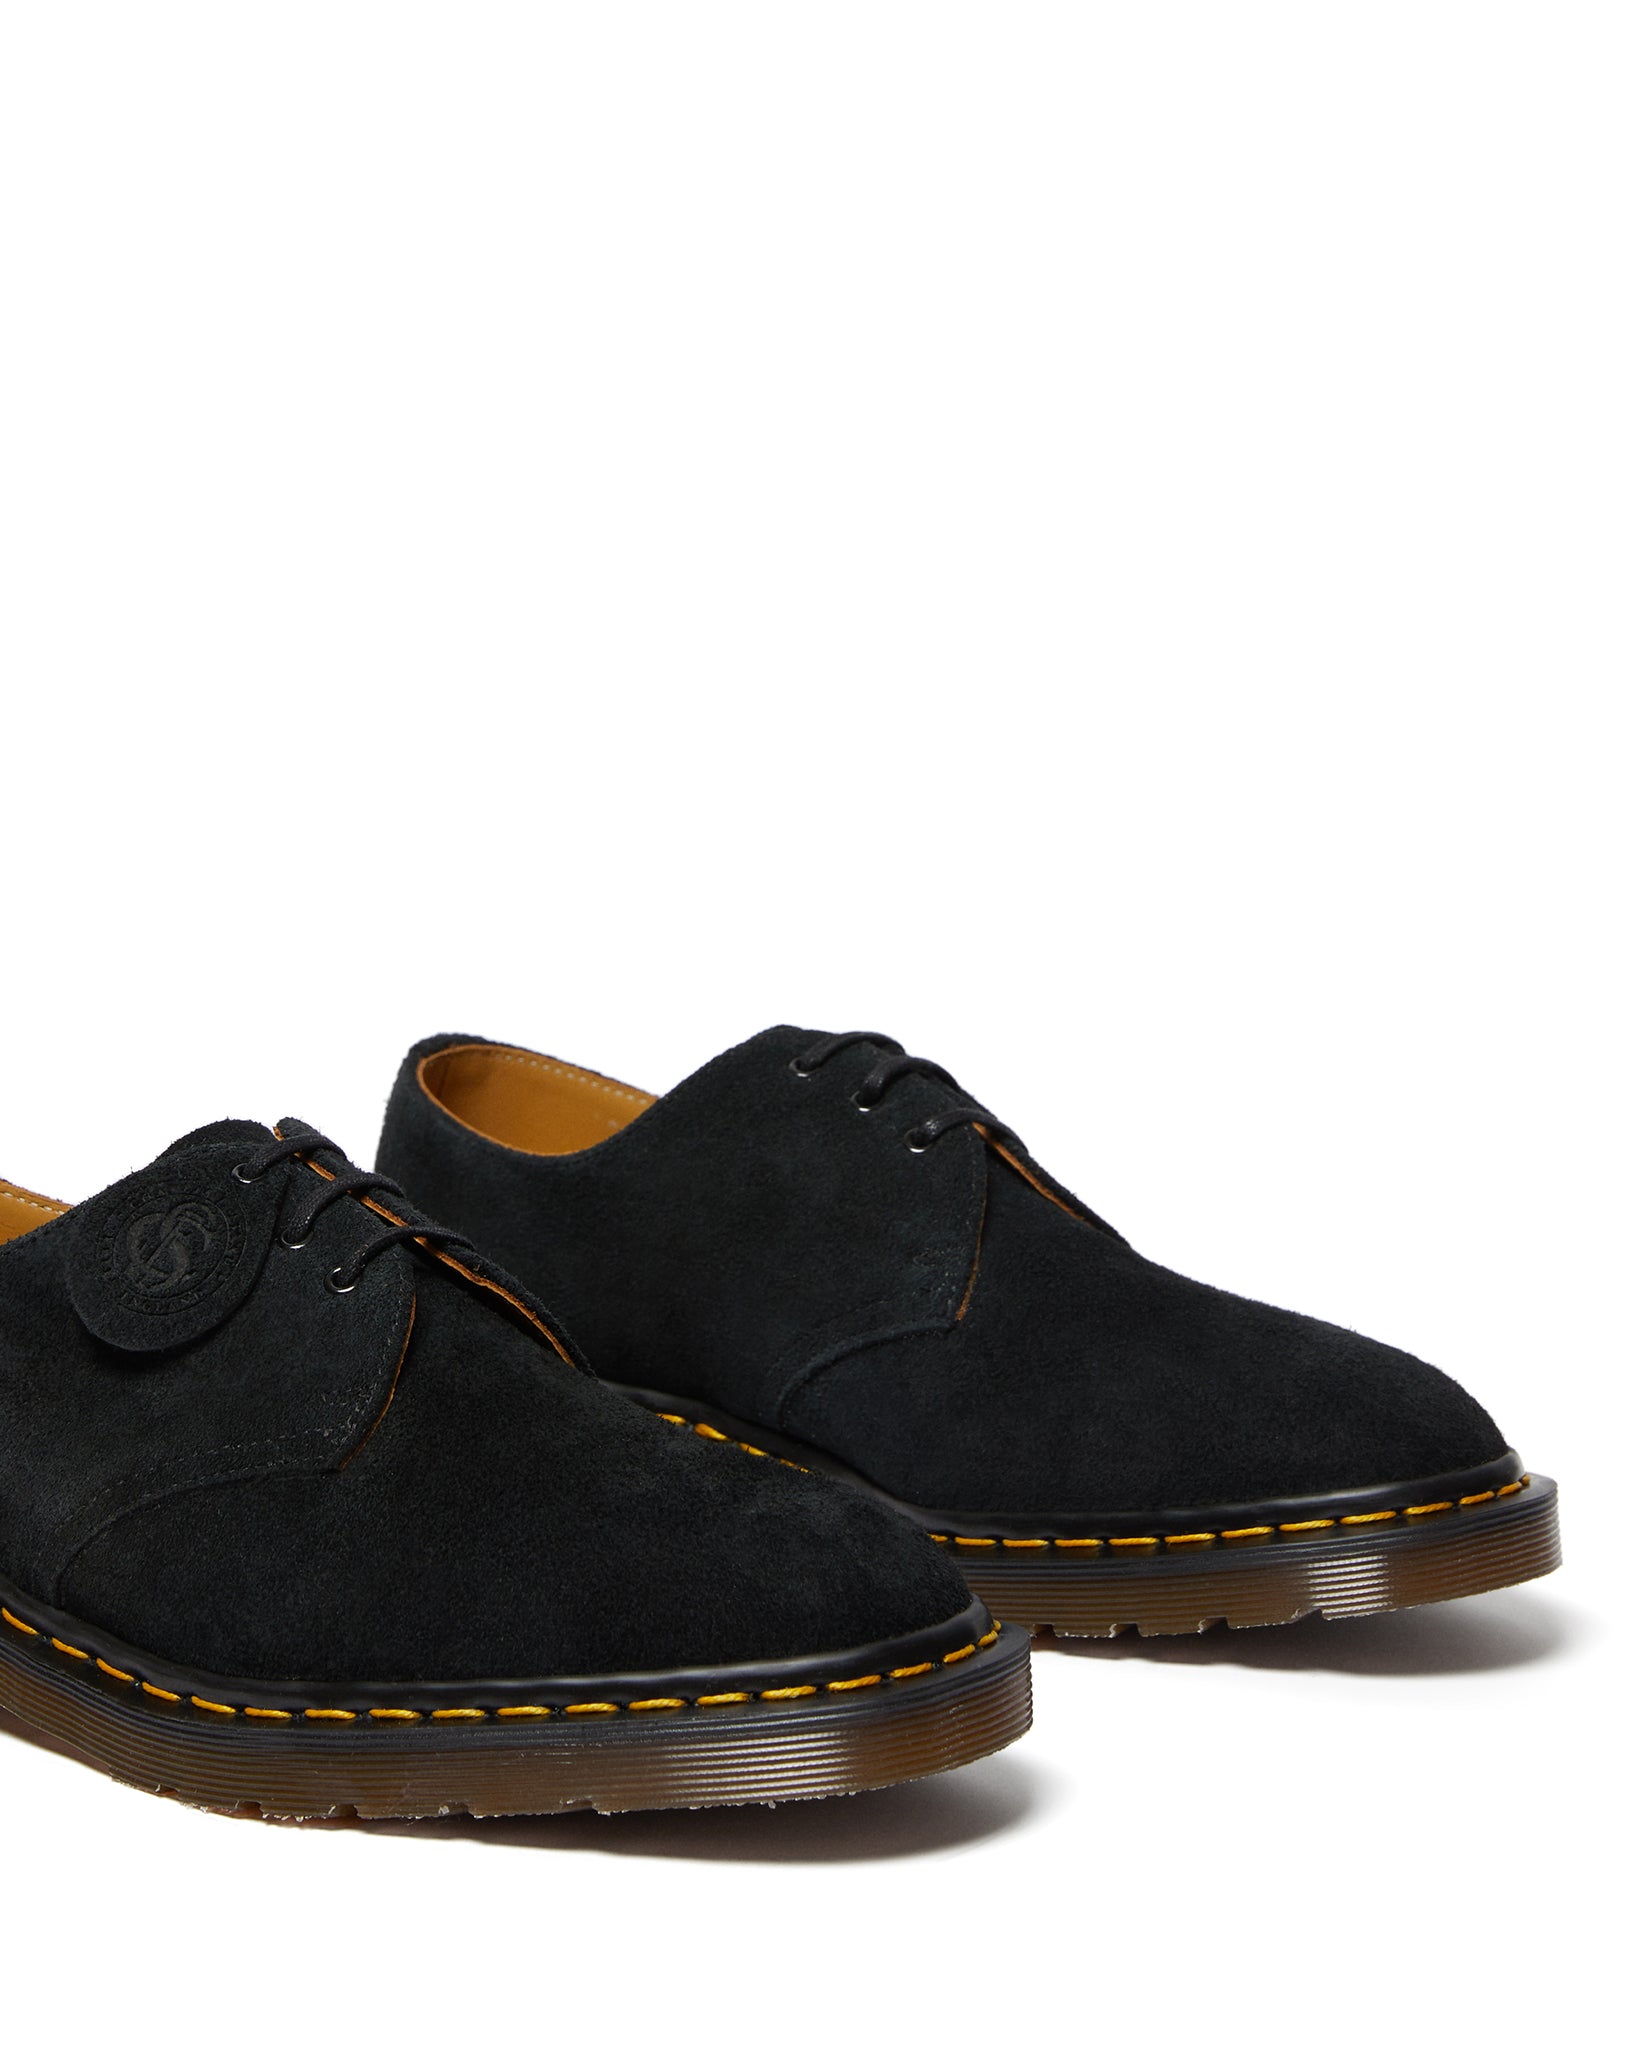 Made in England 1461 Black Desert Oasis Suede Leather Shoes